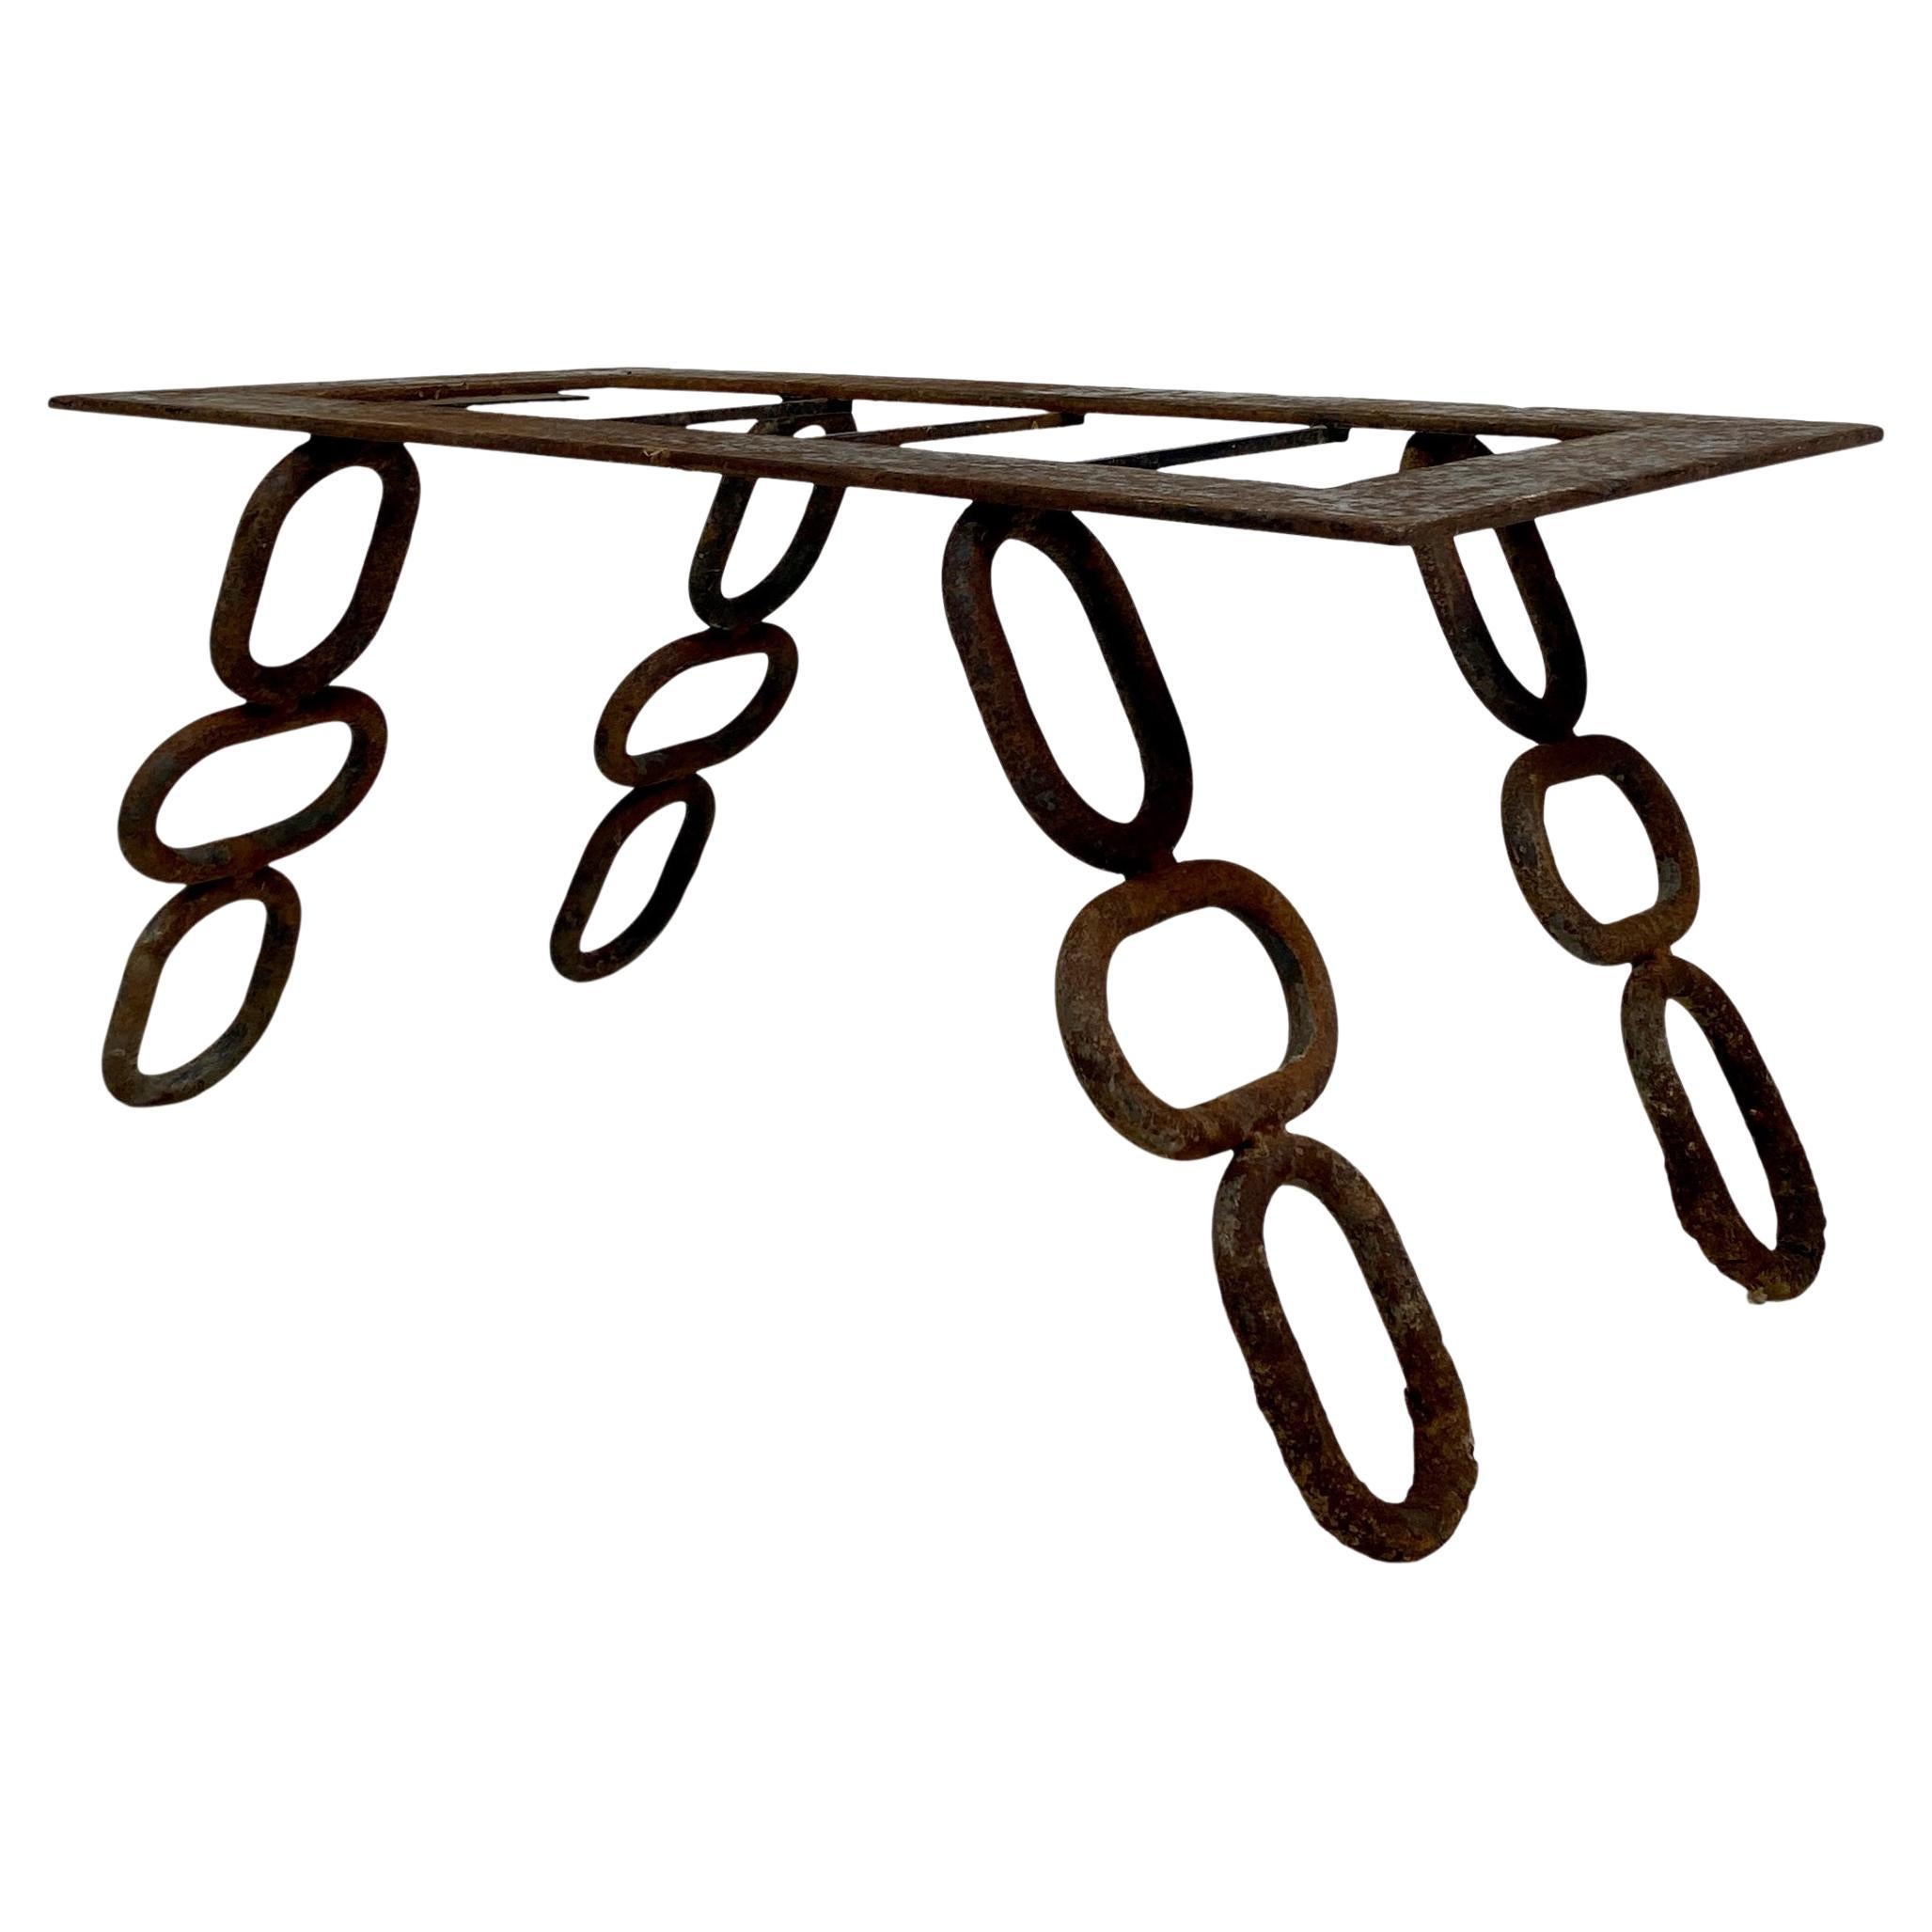 Midcentury Brutalist Iron Chain Link Coffee Table For Sale